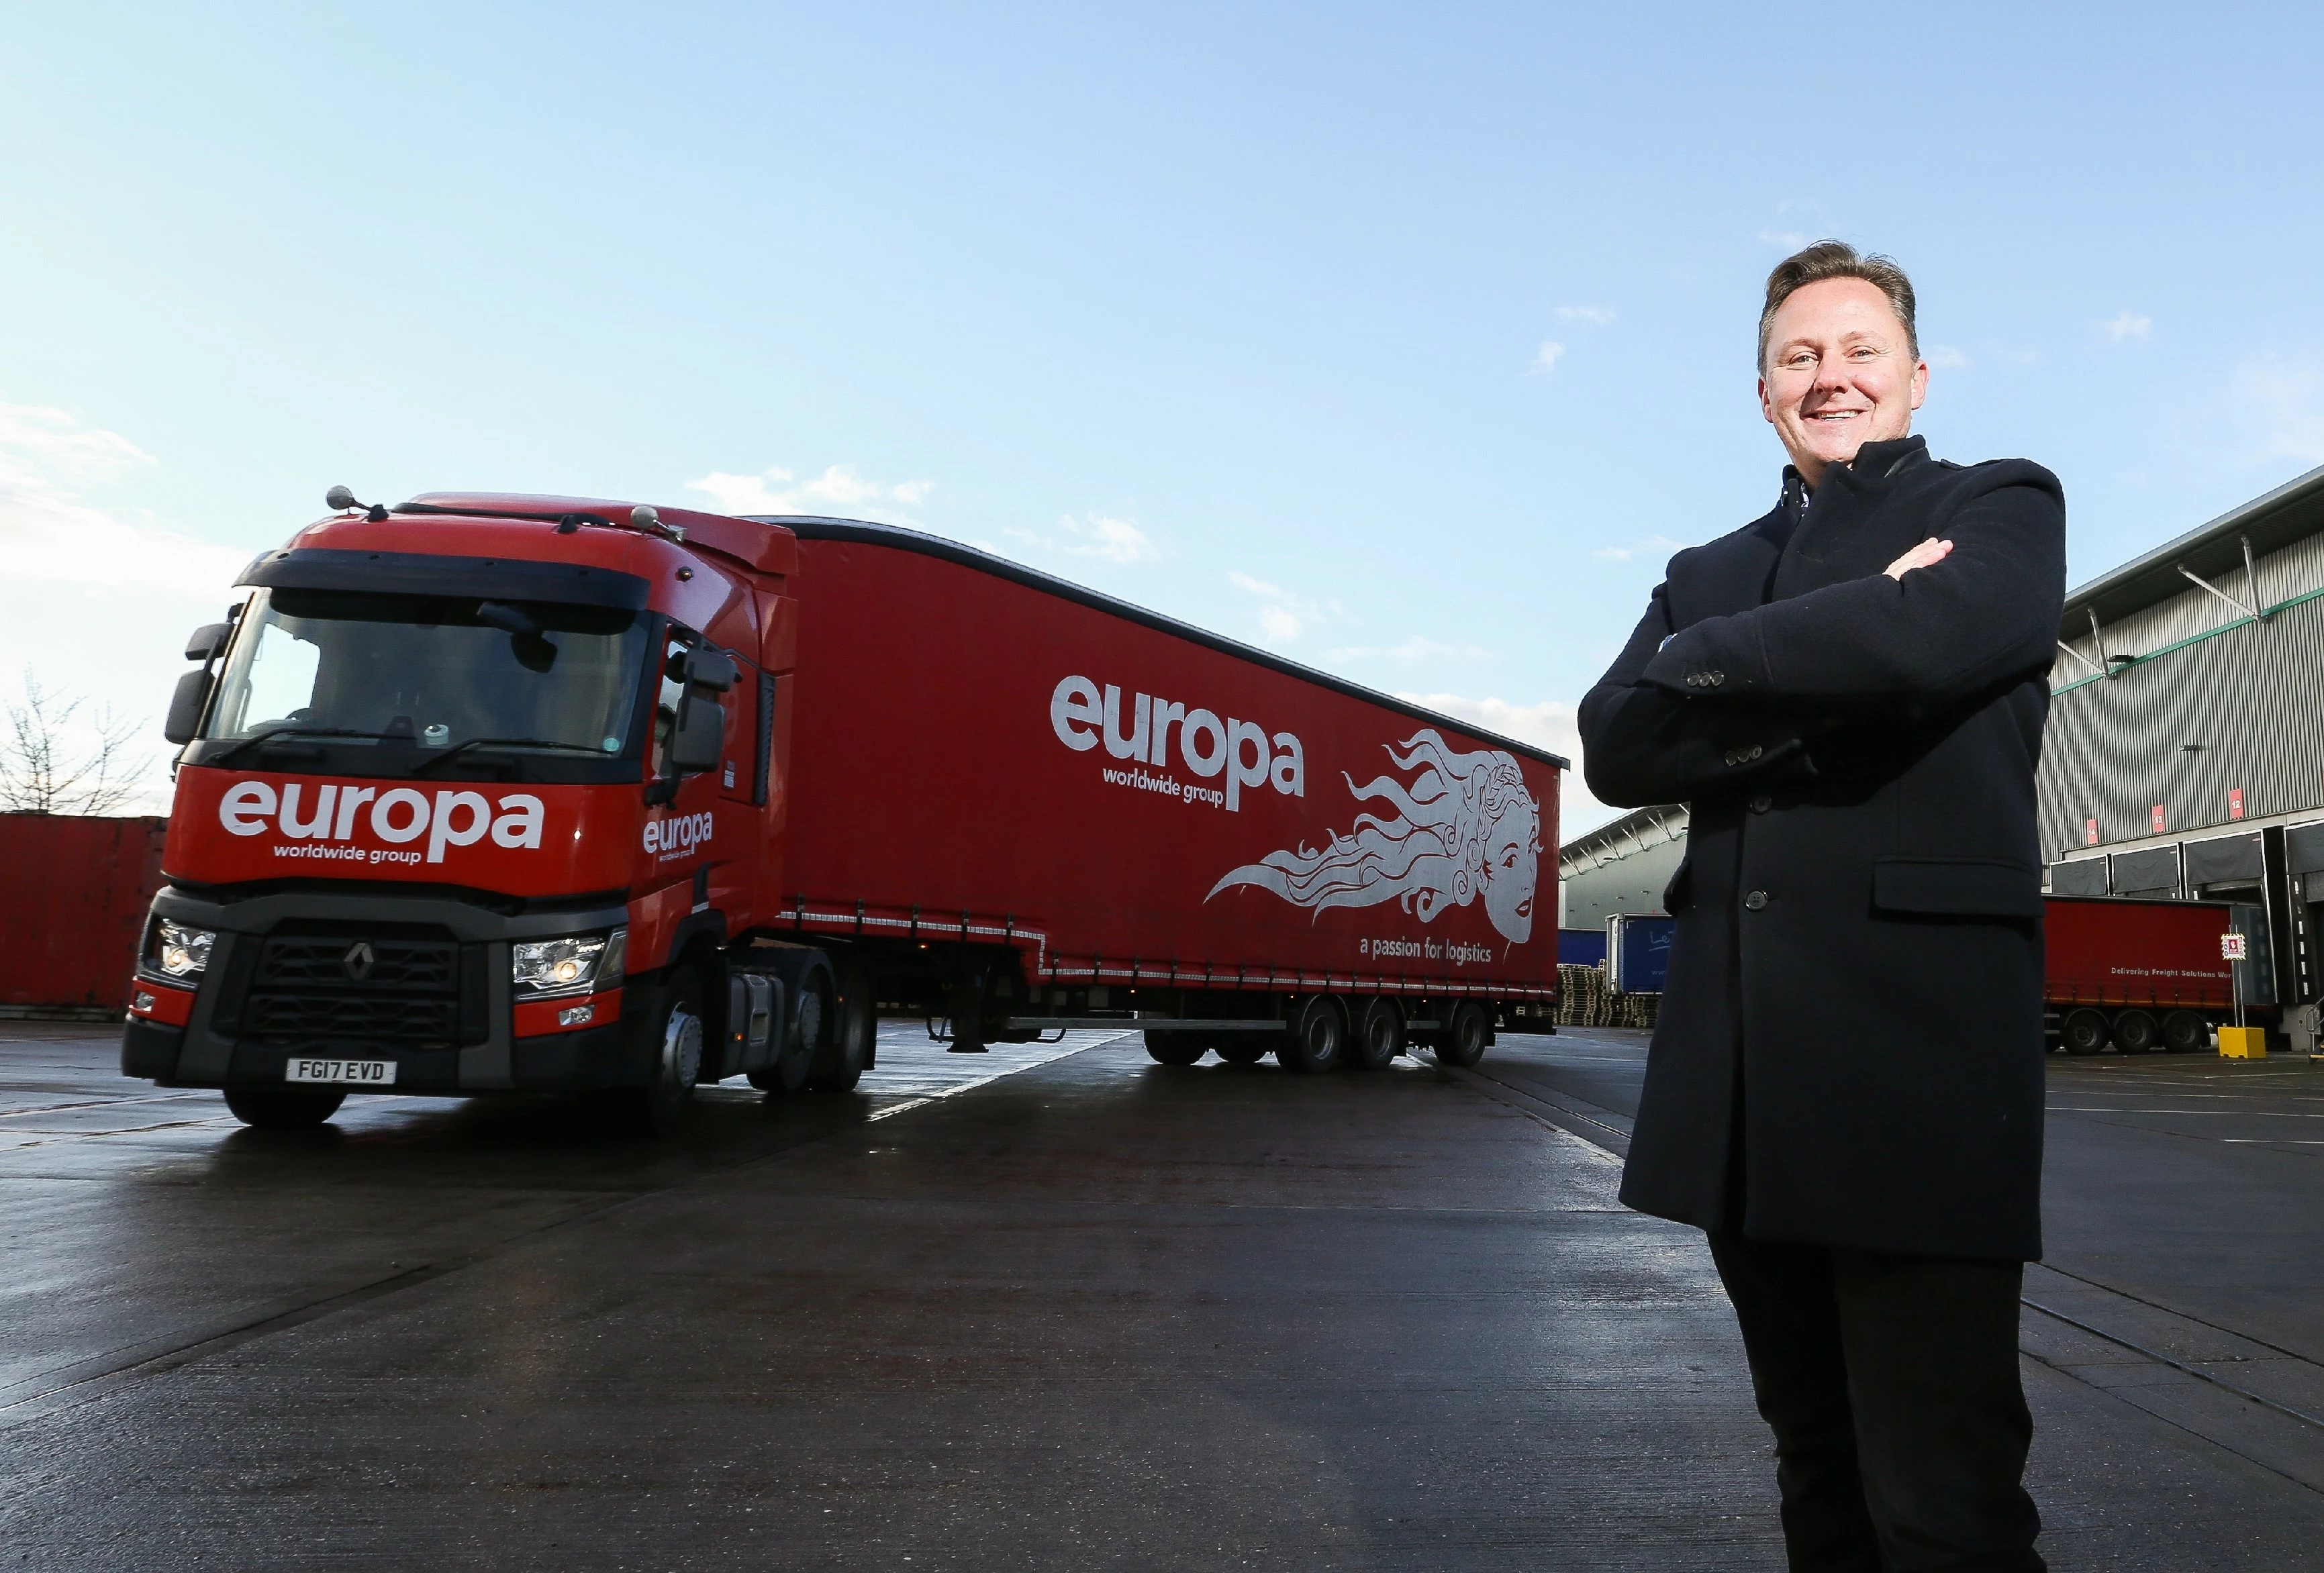 Andrew Baxter, Managing Director of Europa Worldwide Group